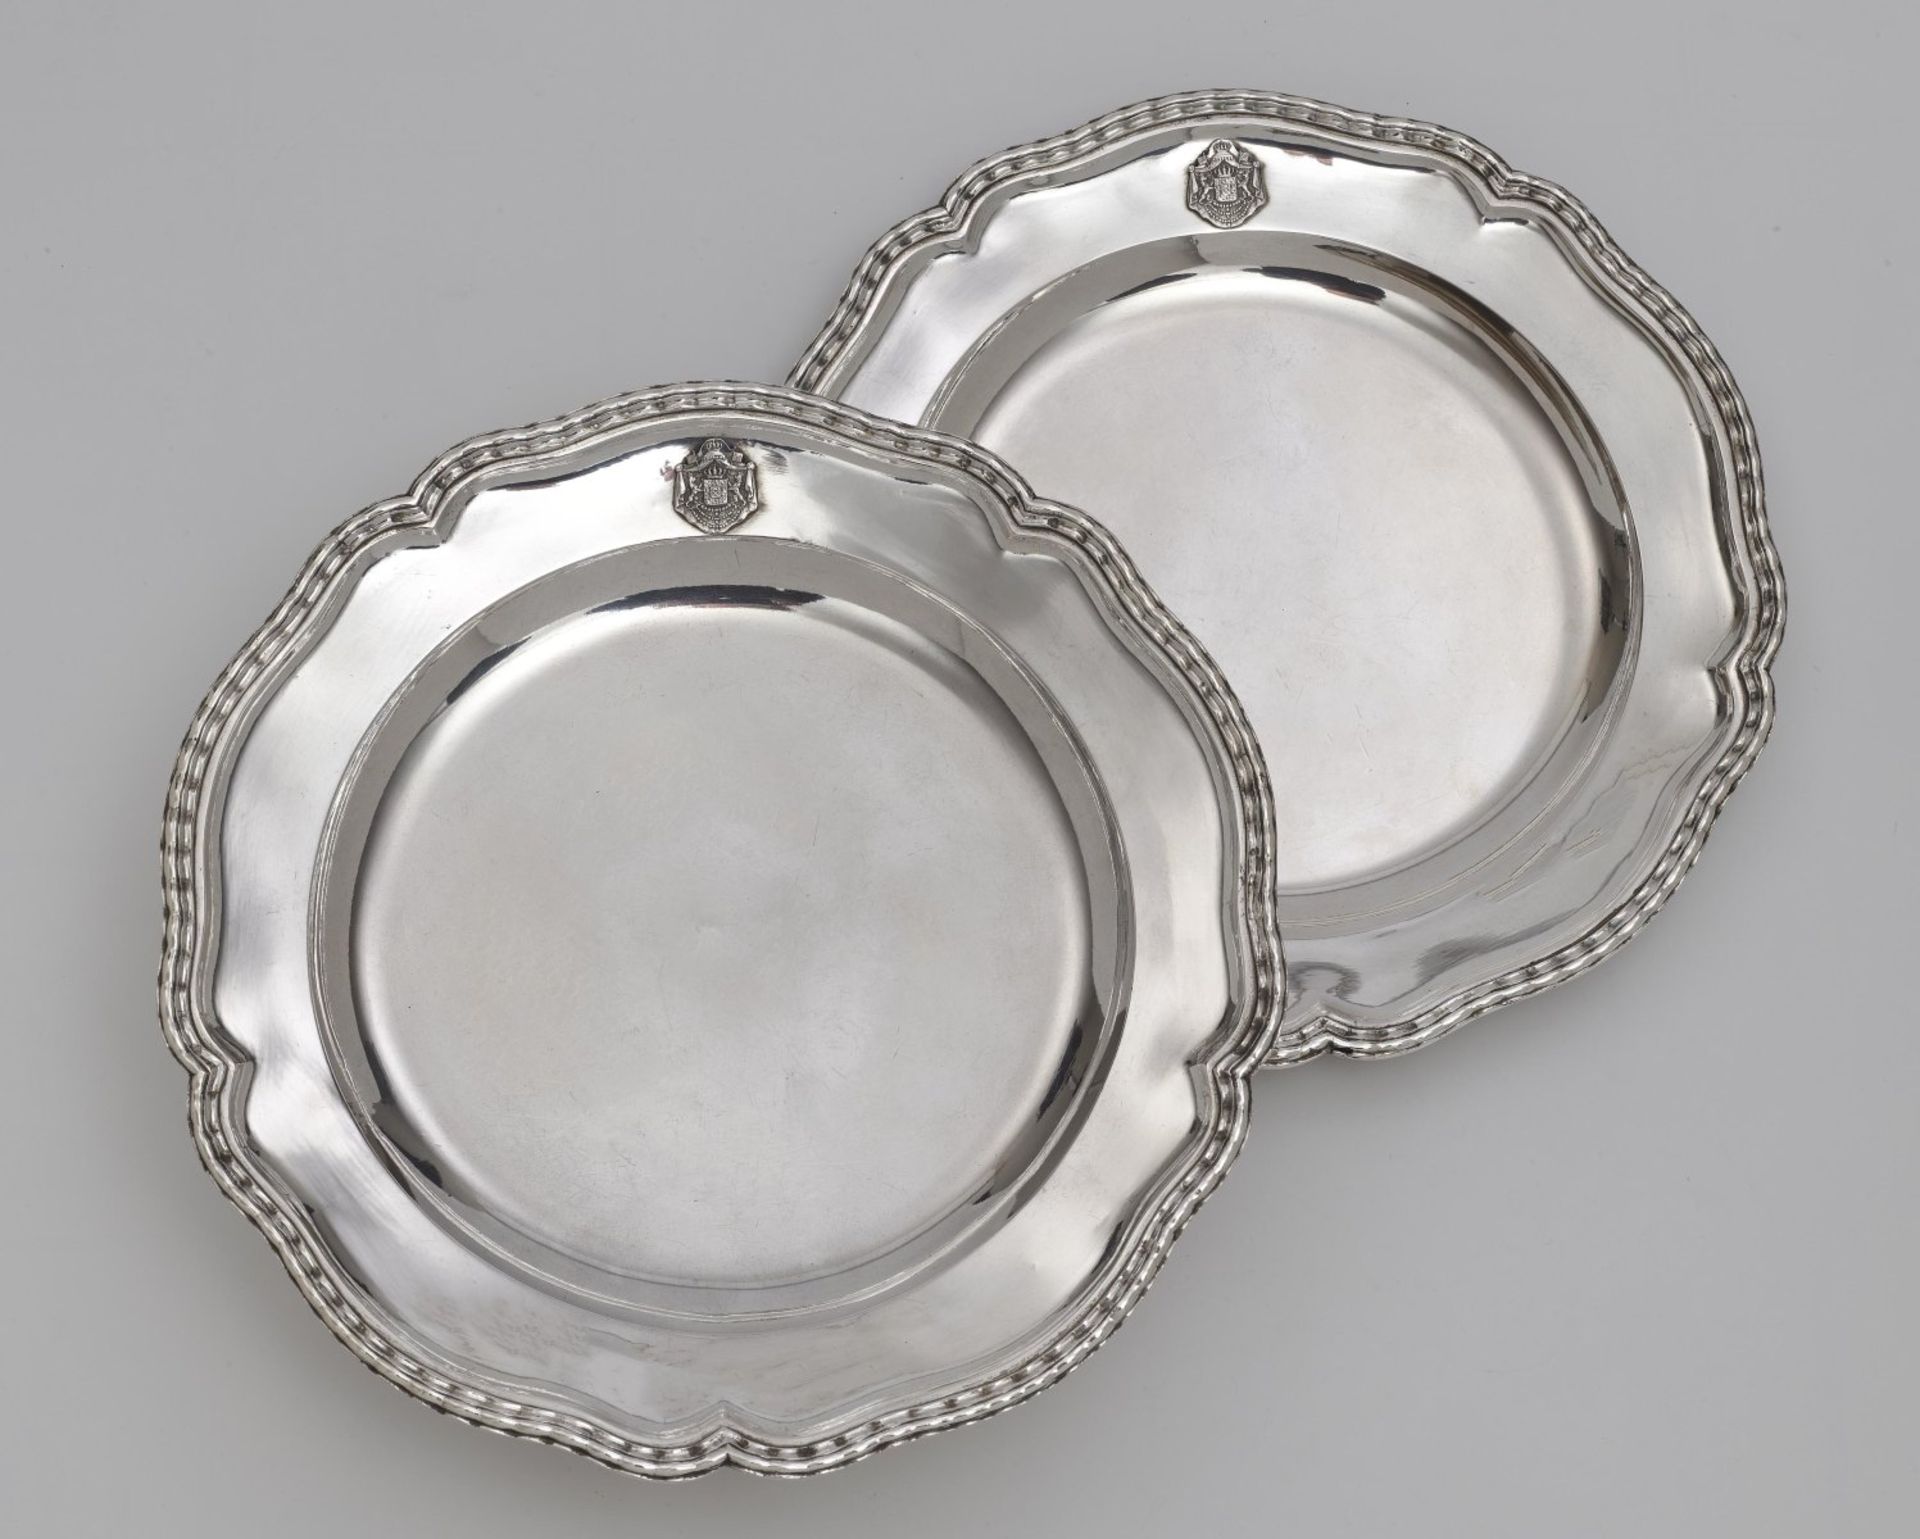 Two plates from the so-called "Bamberg Service" ATTENTION Lot 3-6 will be sold after lot 67